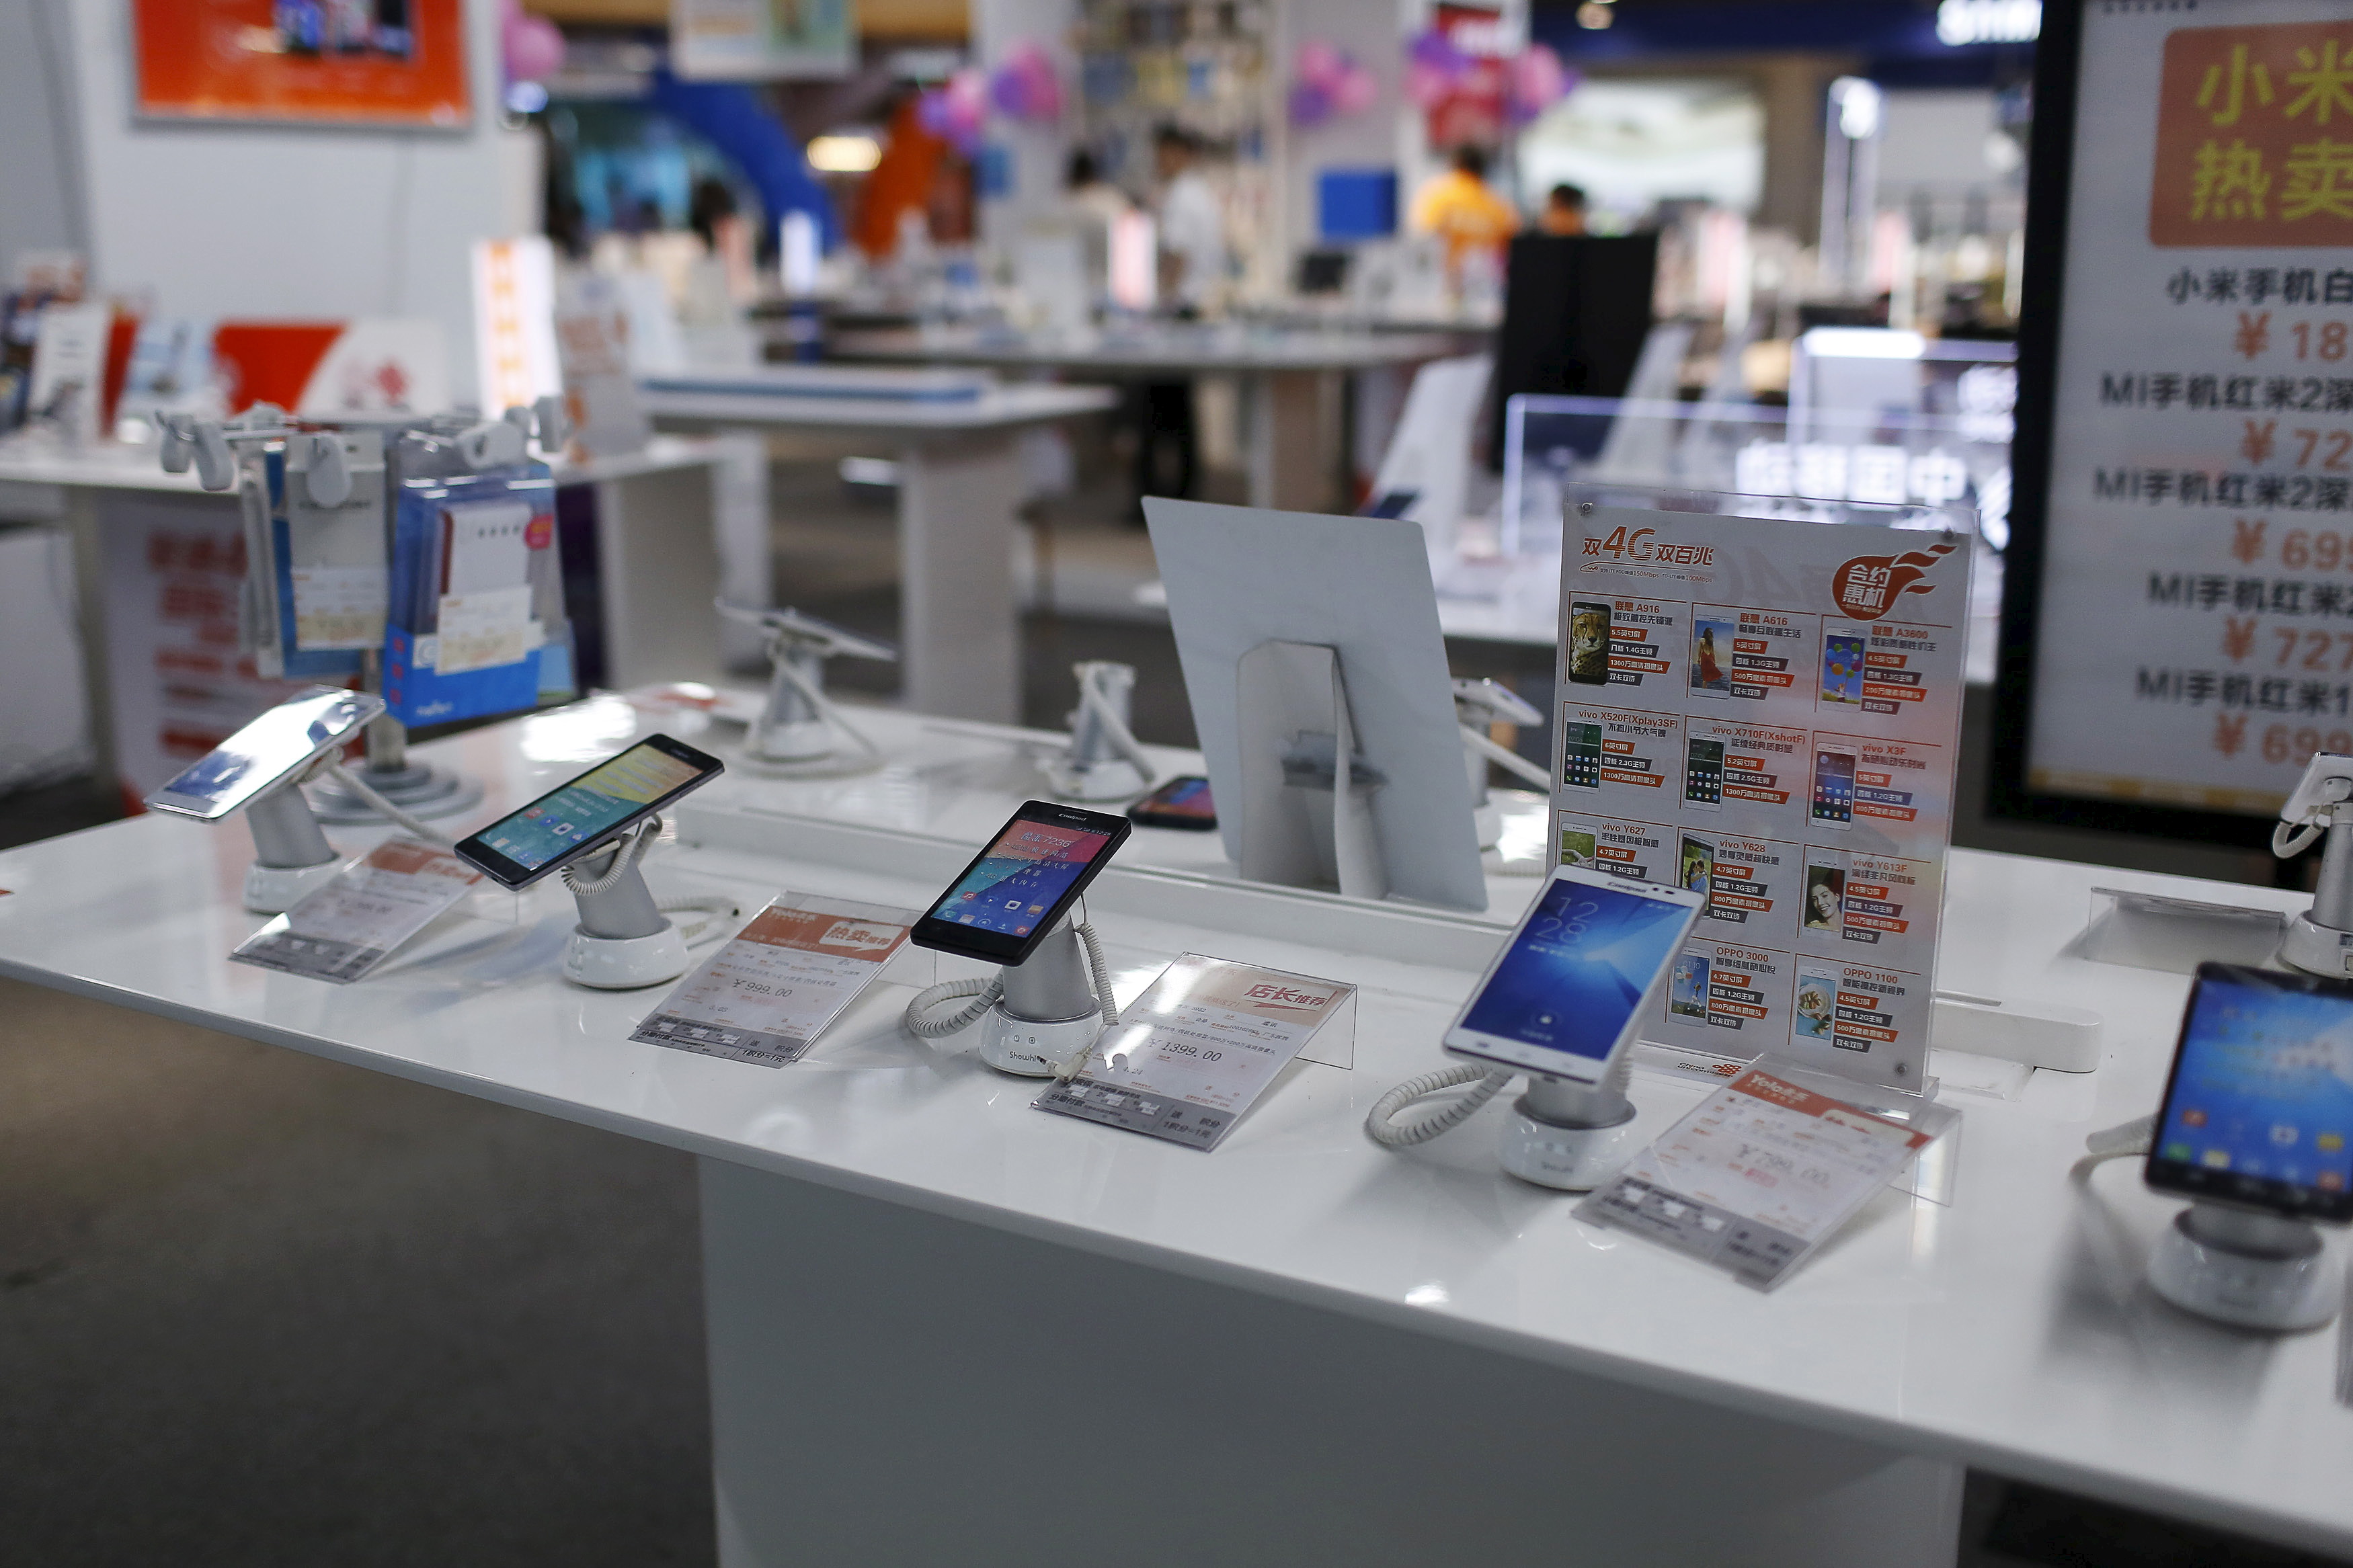 Mobile phones are seen on display at an electronics market in Shanghai